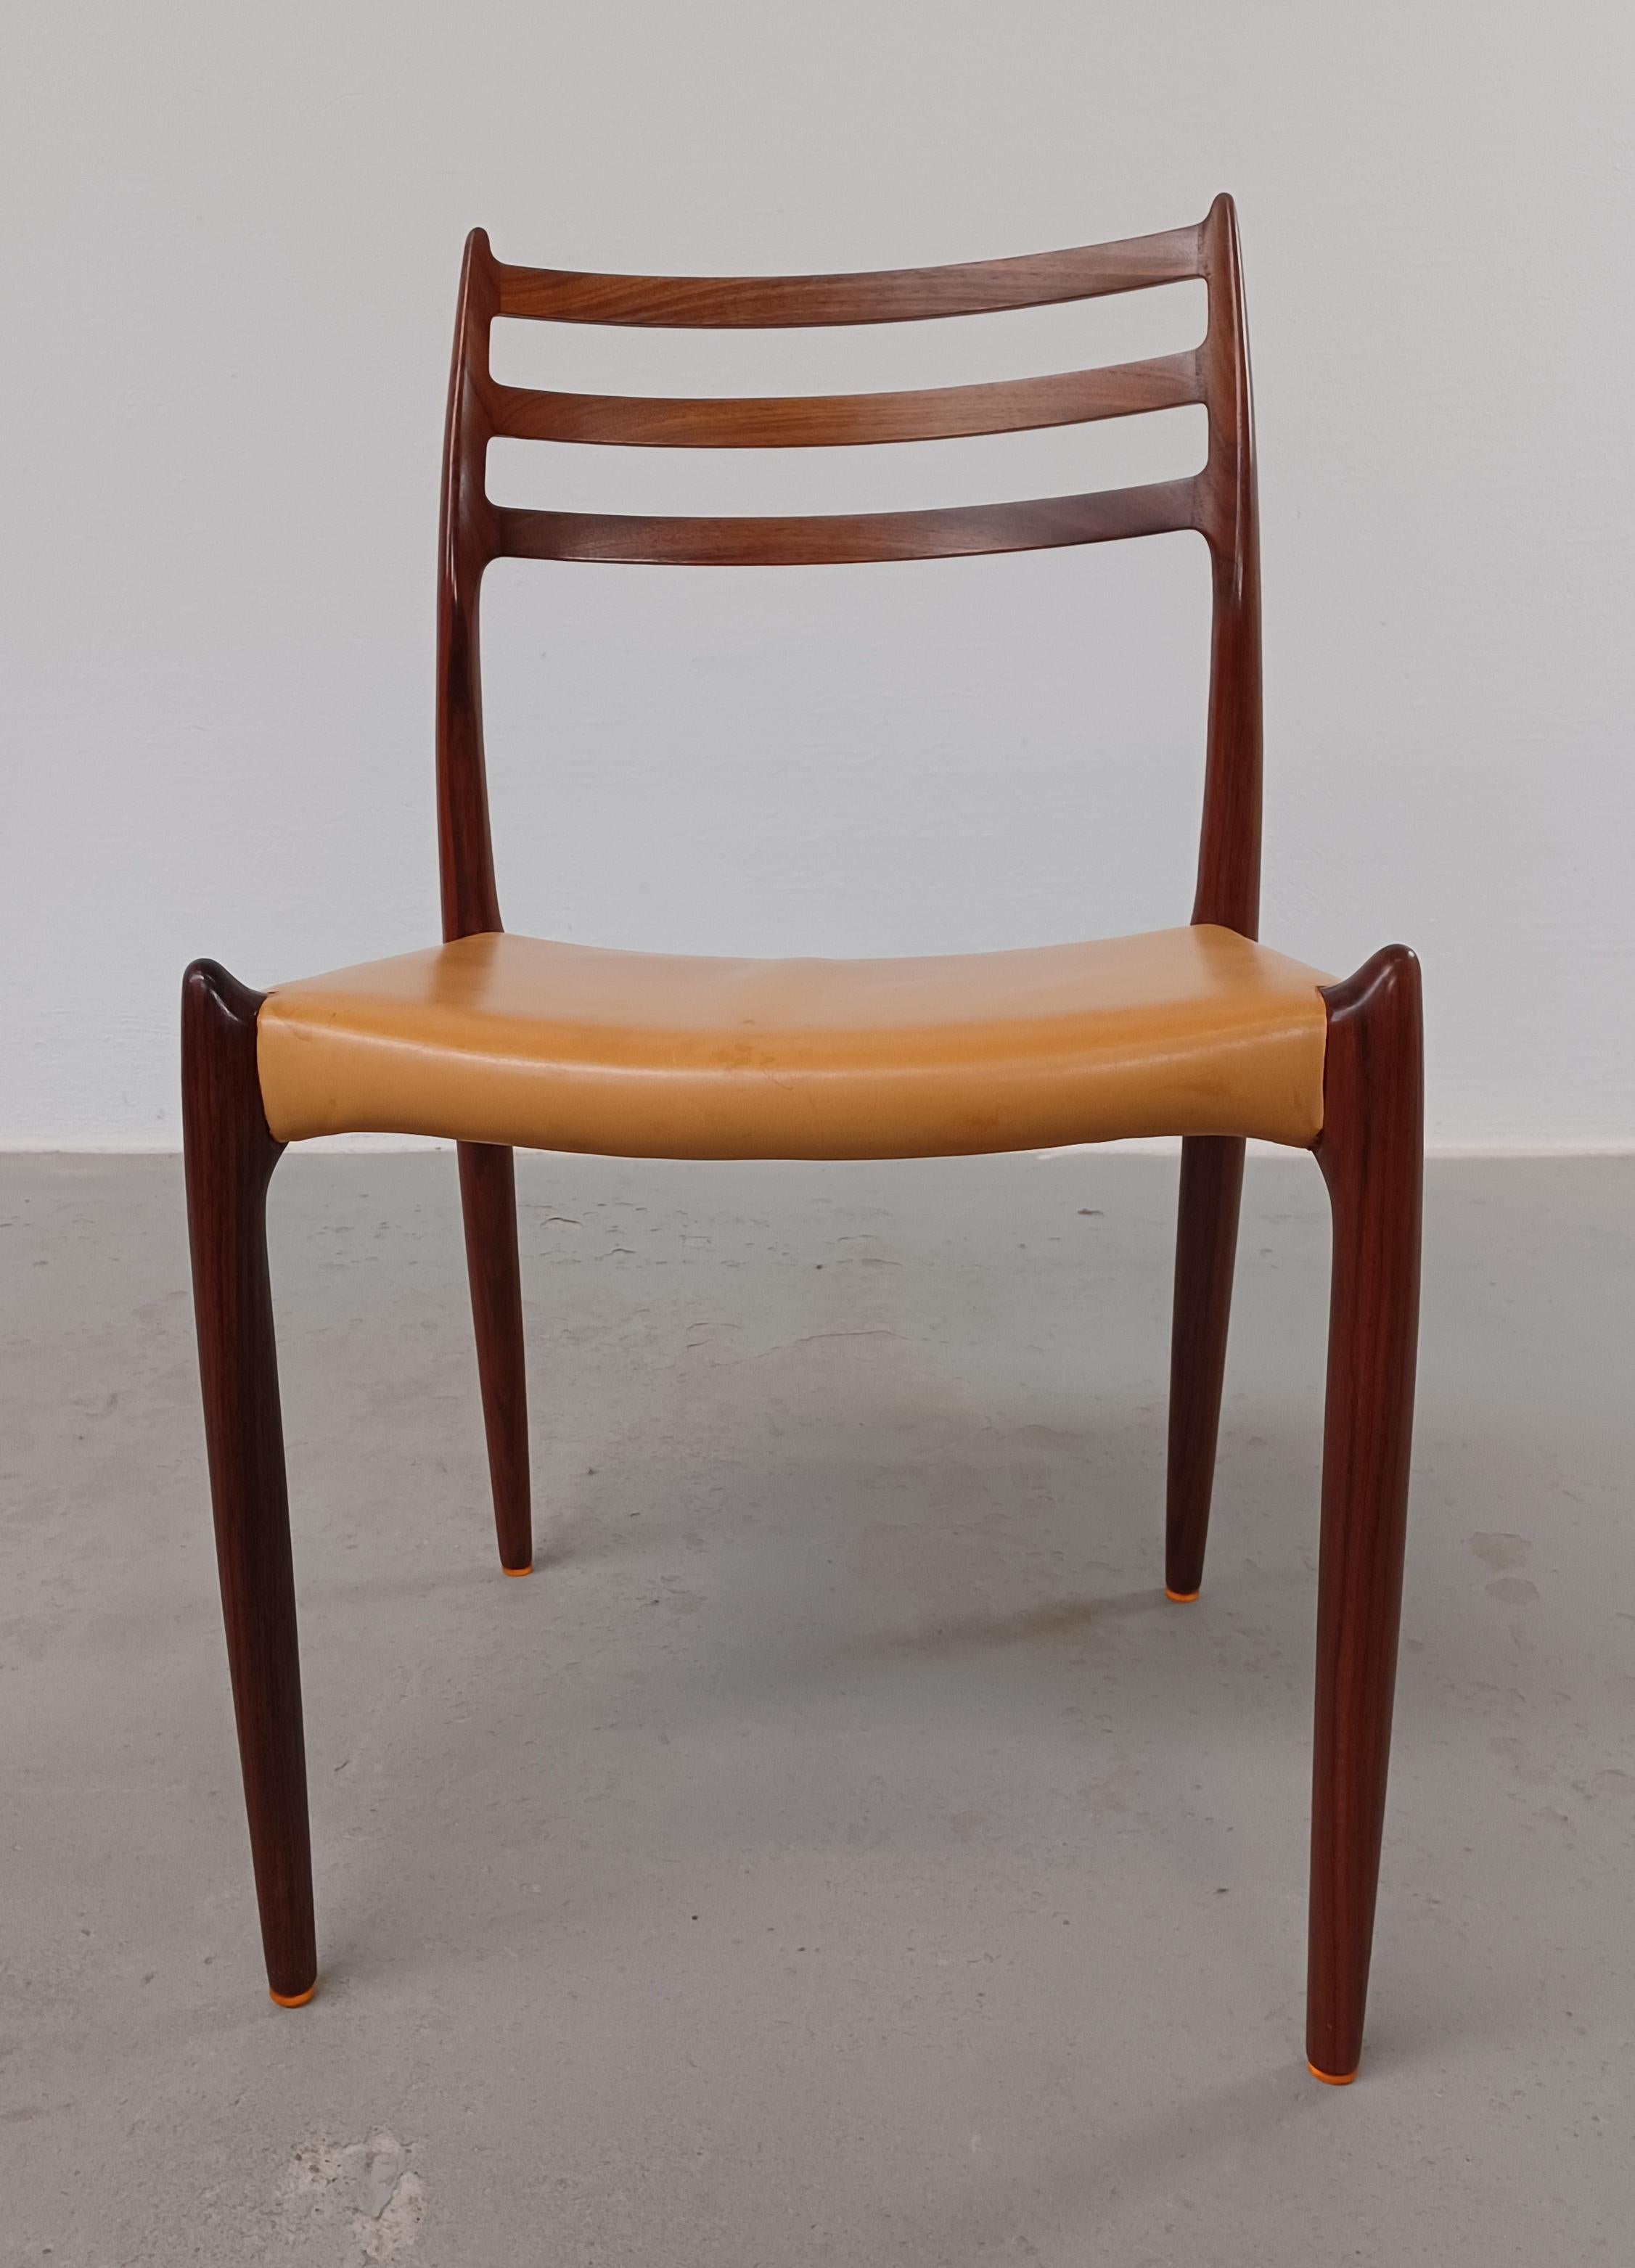 The iconic model 78 dining chair was designed in 1954 by Niels O. Møller for J.L. Møllers Møbelfabrik. The model is with it´s organic shapes and pieces of wood that 